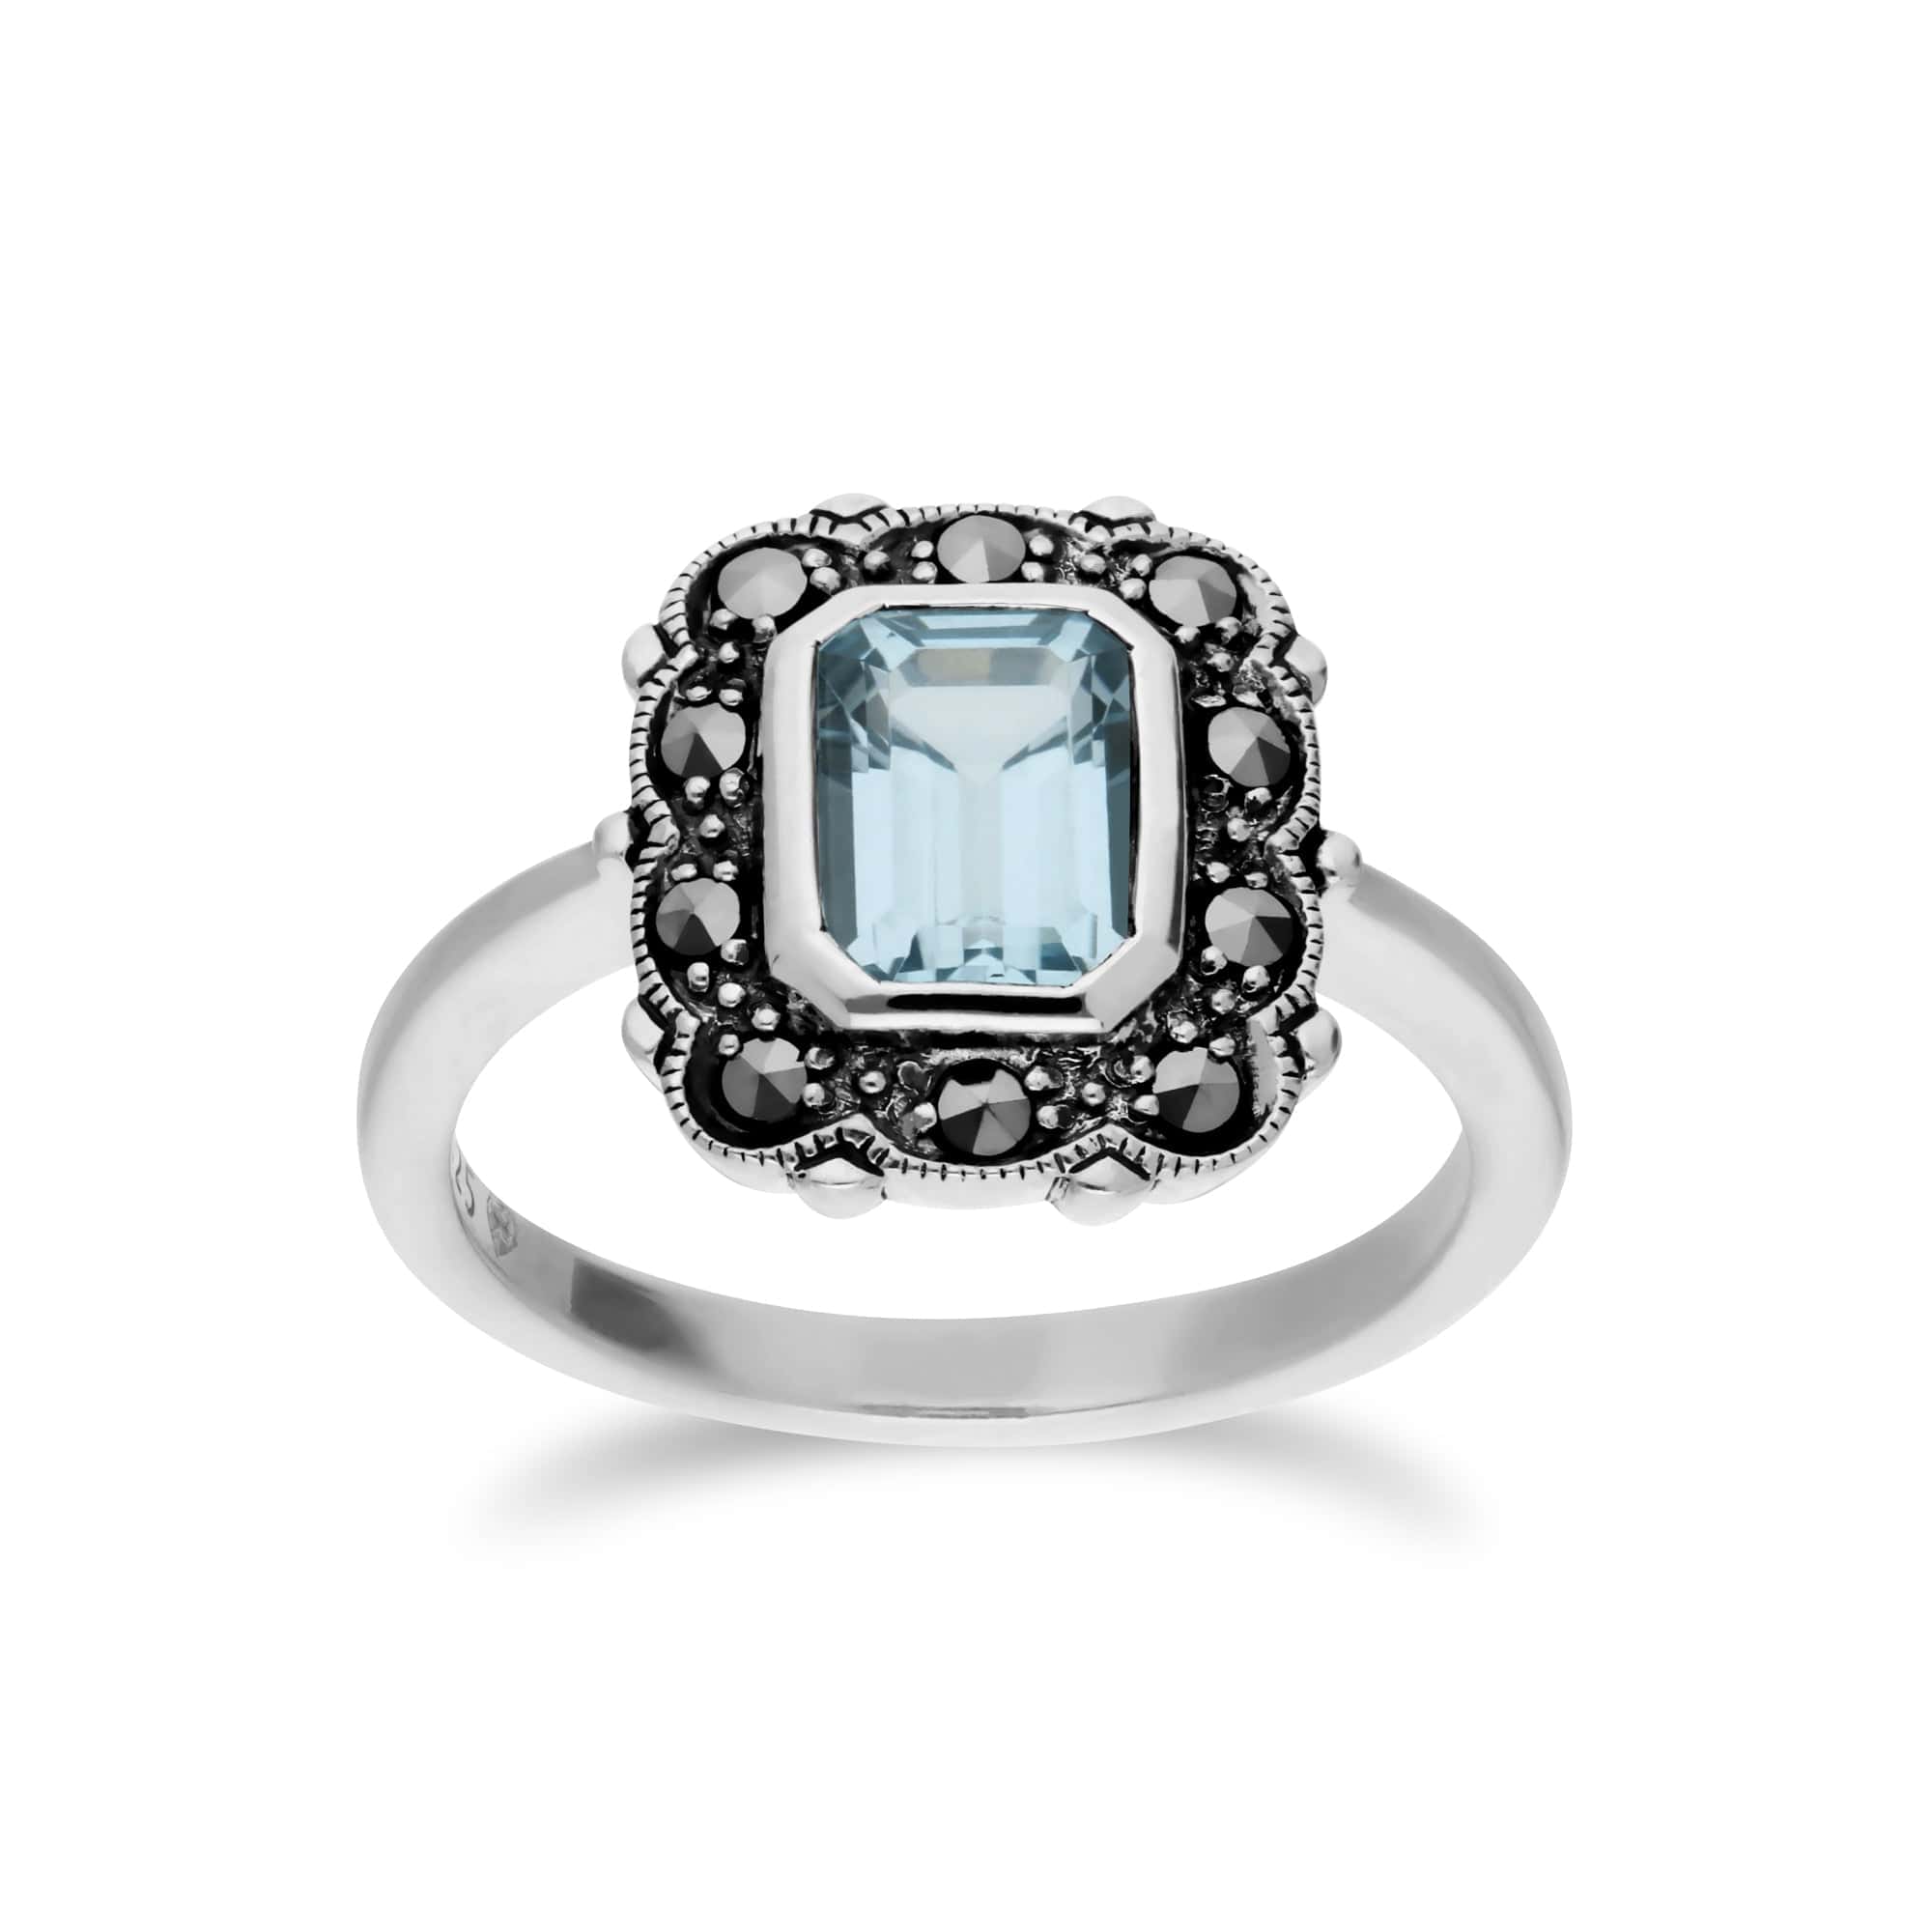 214R597103925 Art Nouveau Style Octagon Blue Topaz & Marcasite Border Ring in 925 Sterling Silver 1